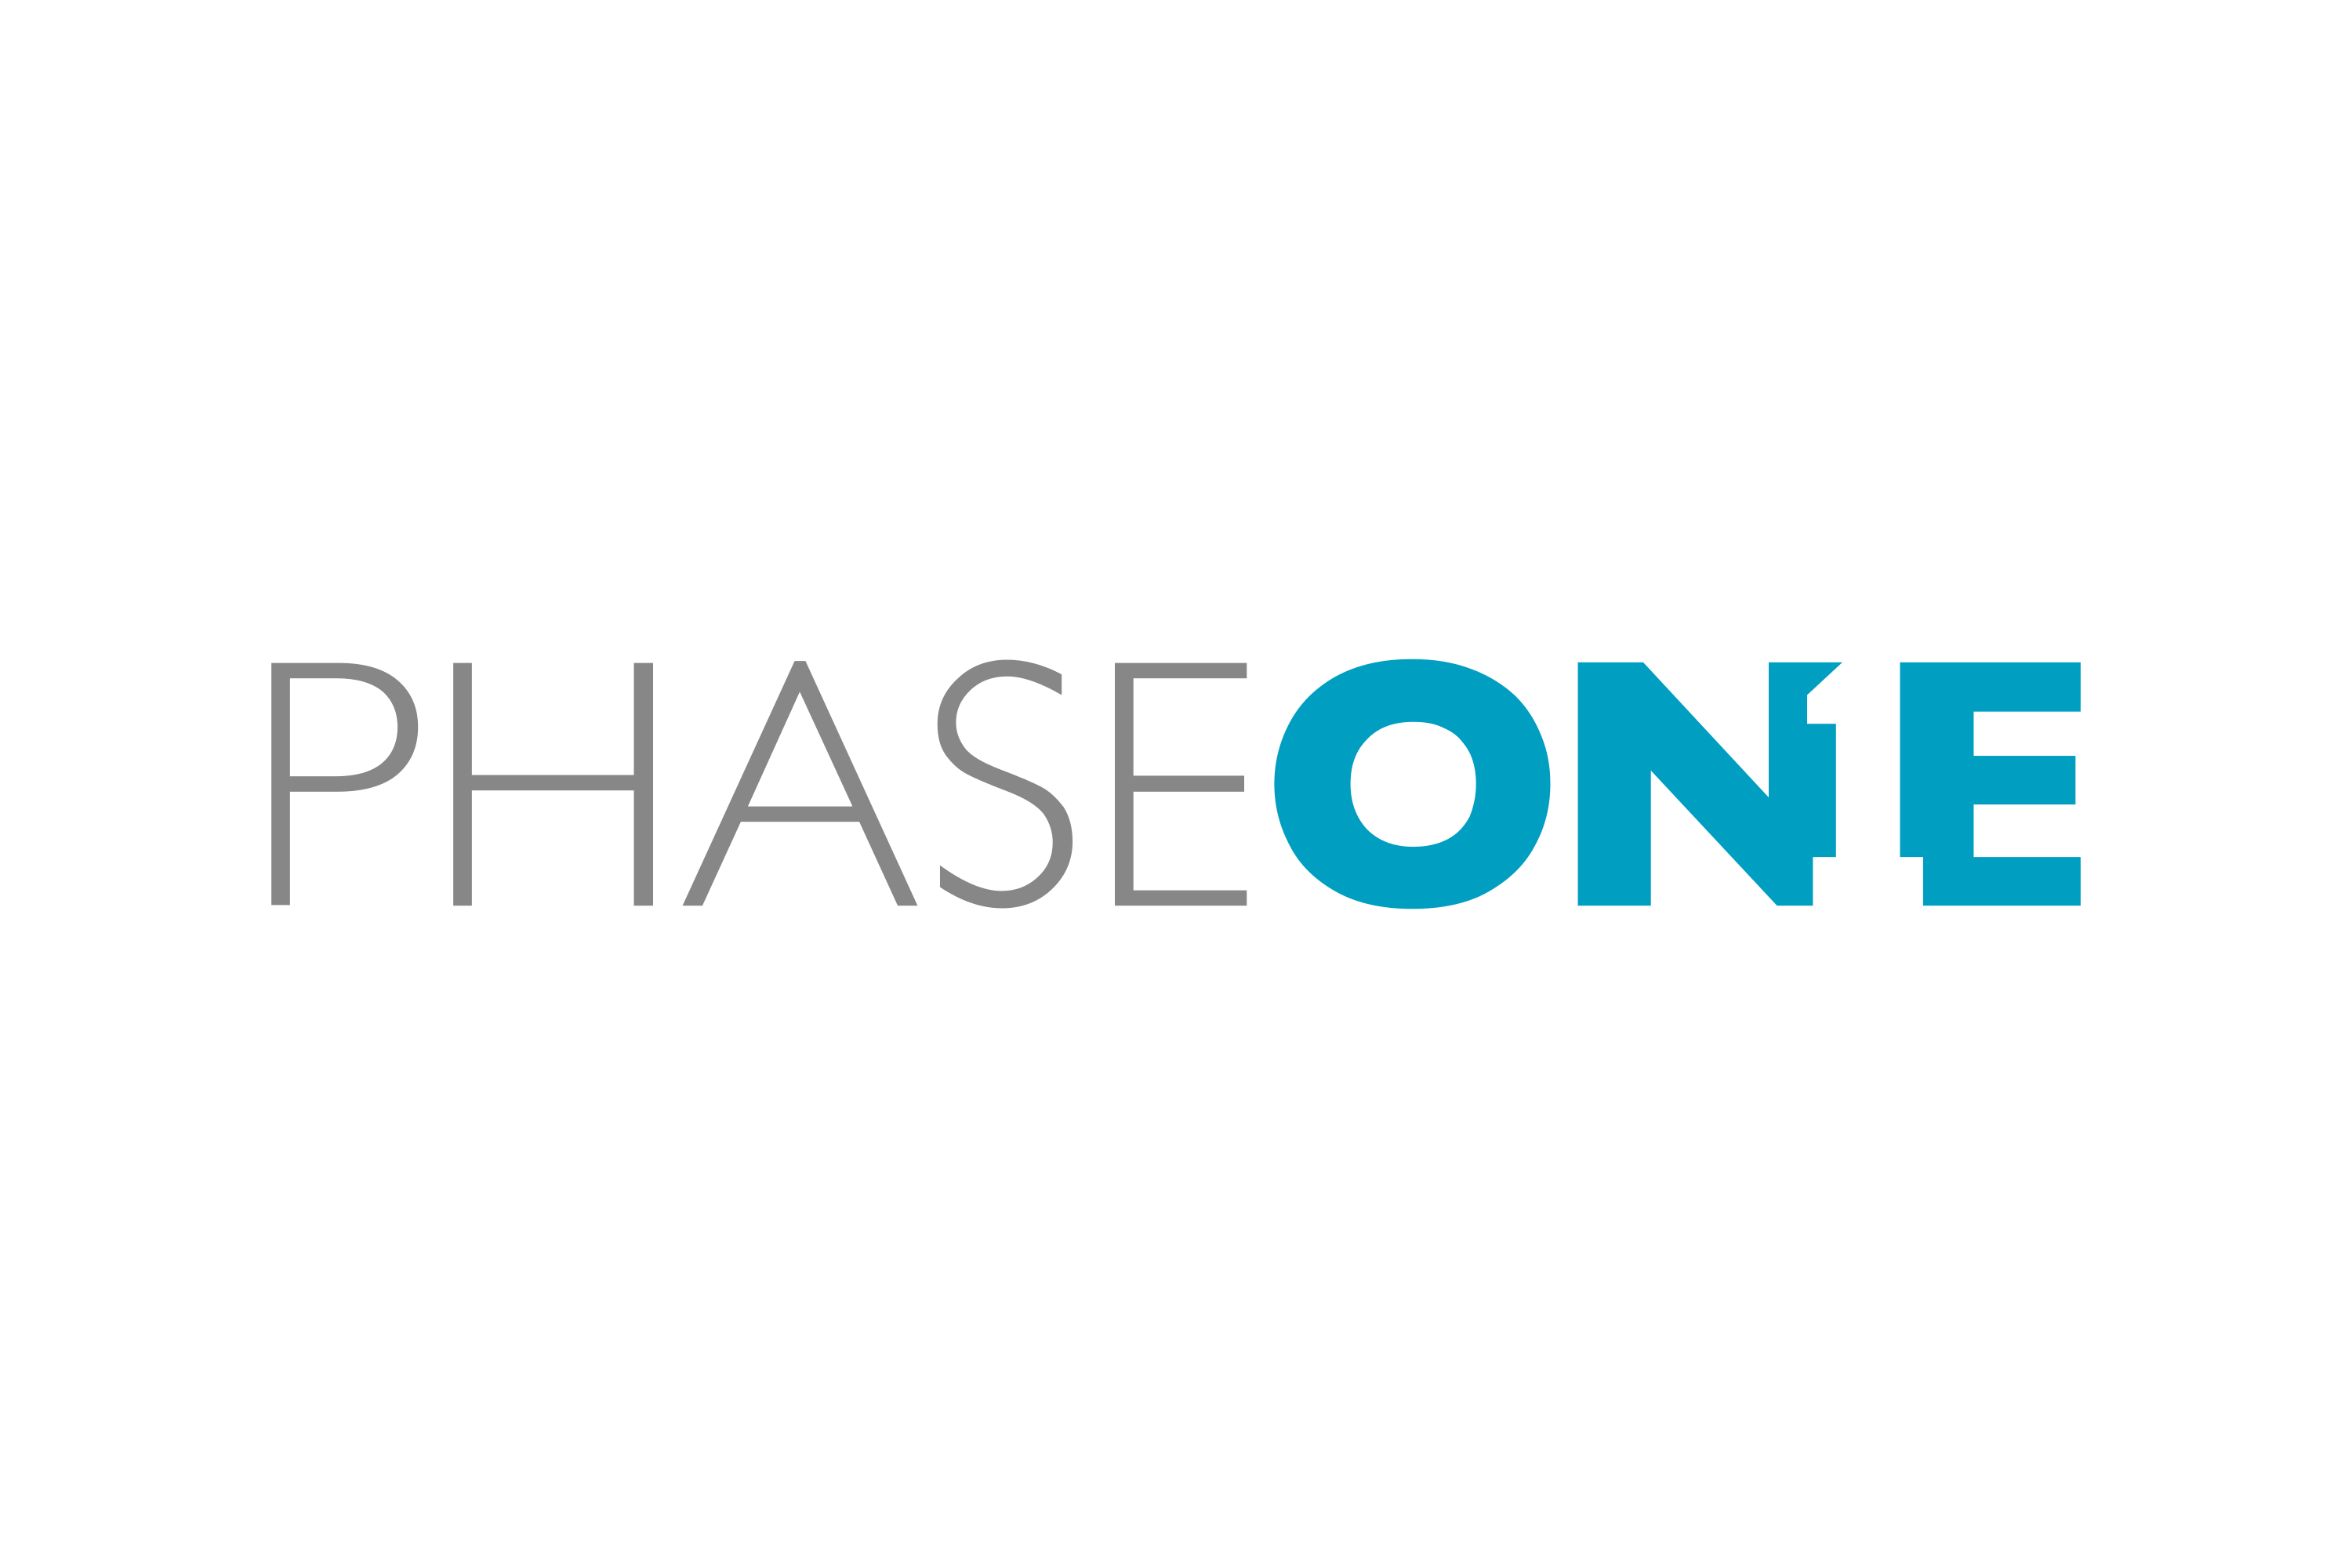 Download Phase One Logo in SVG Vector or PNG File Format - Logo.wine